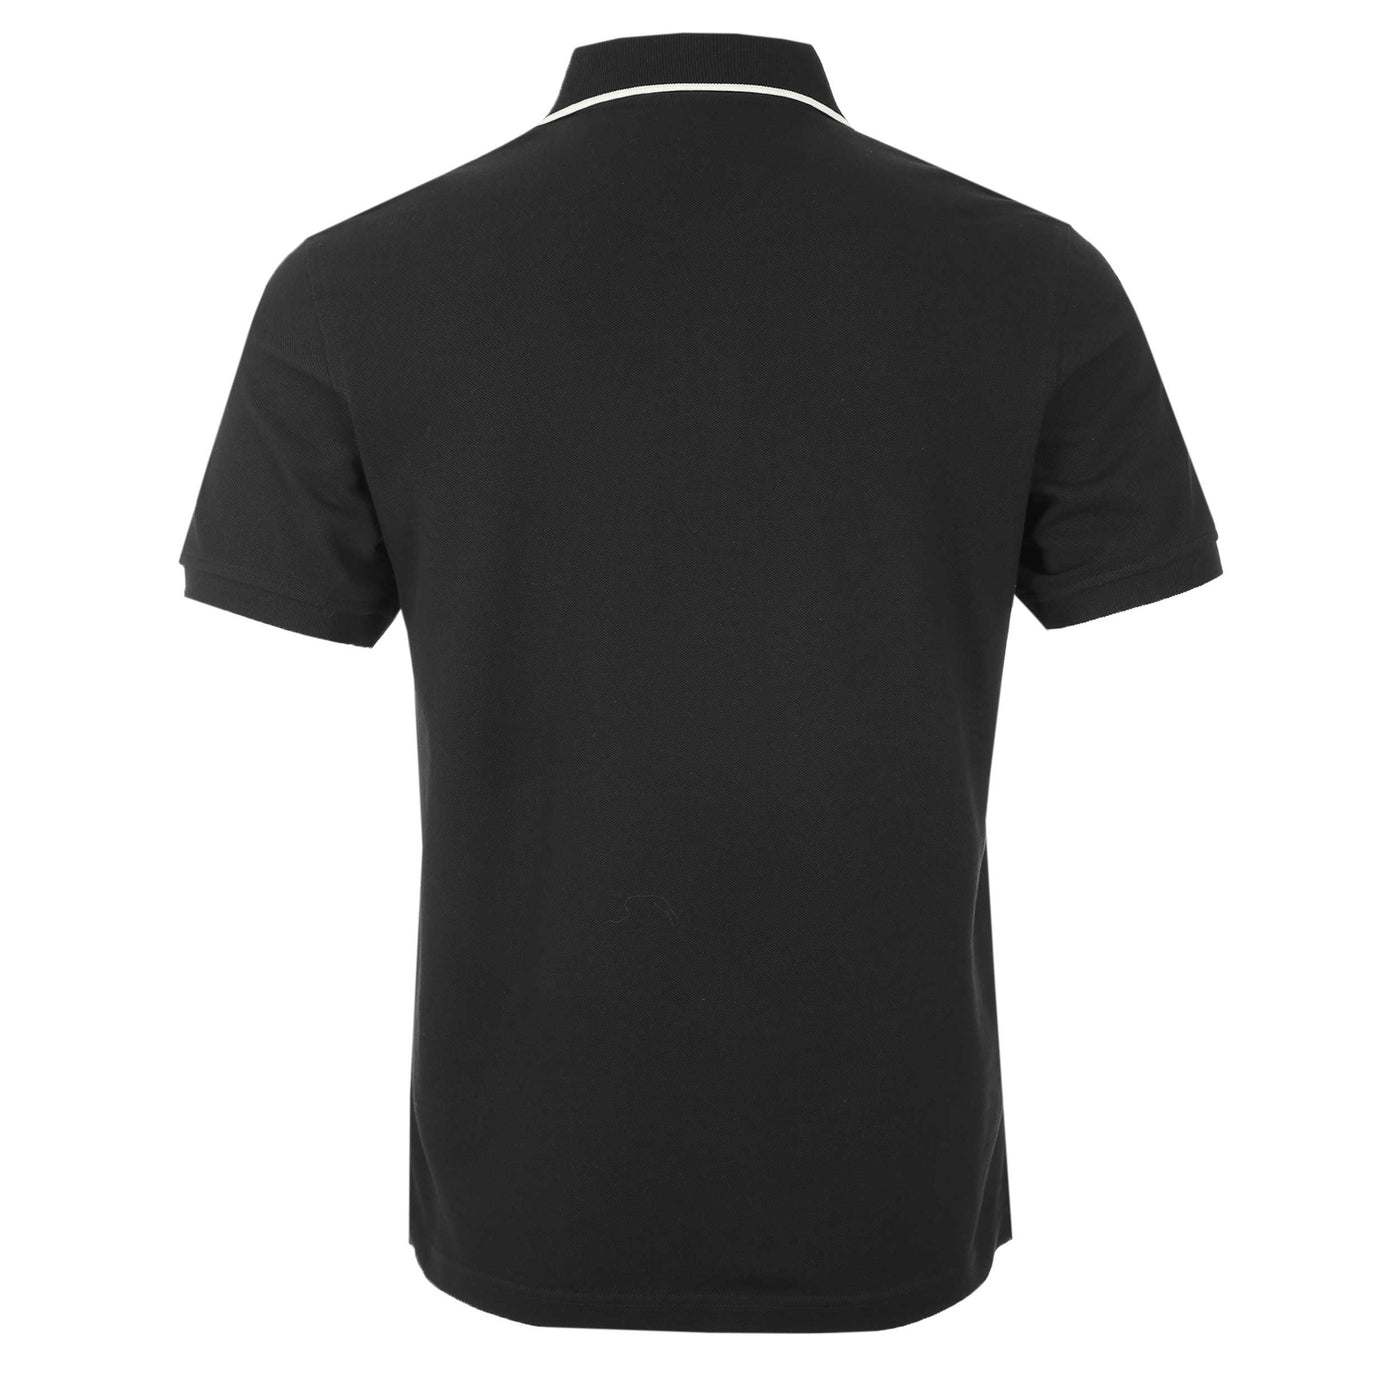 Belstaff Tipped Polo Shirt in Black Back